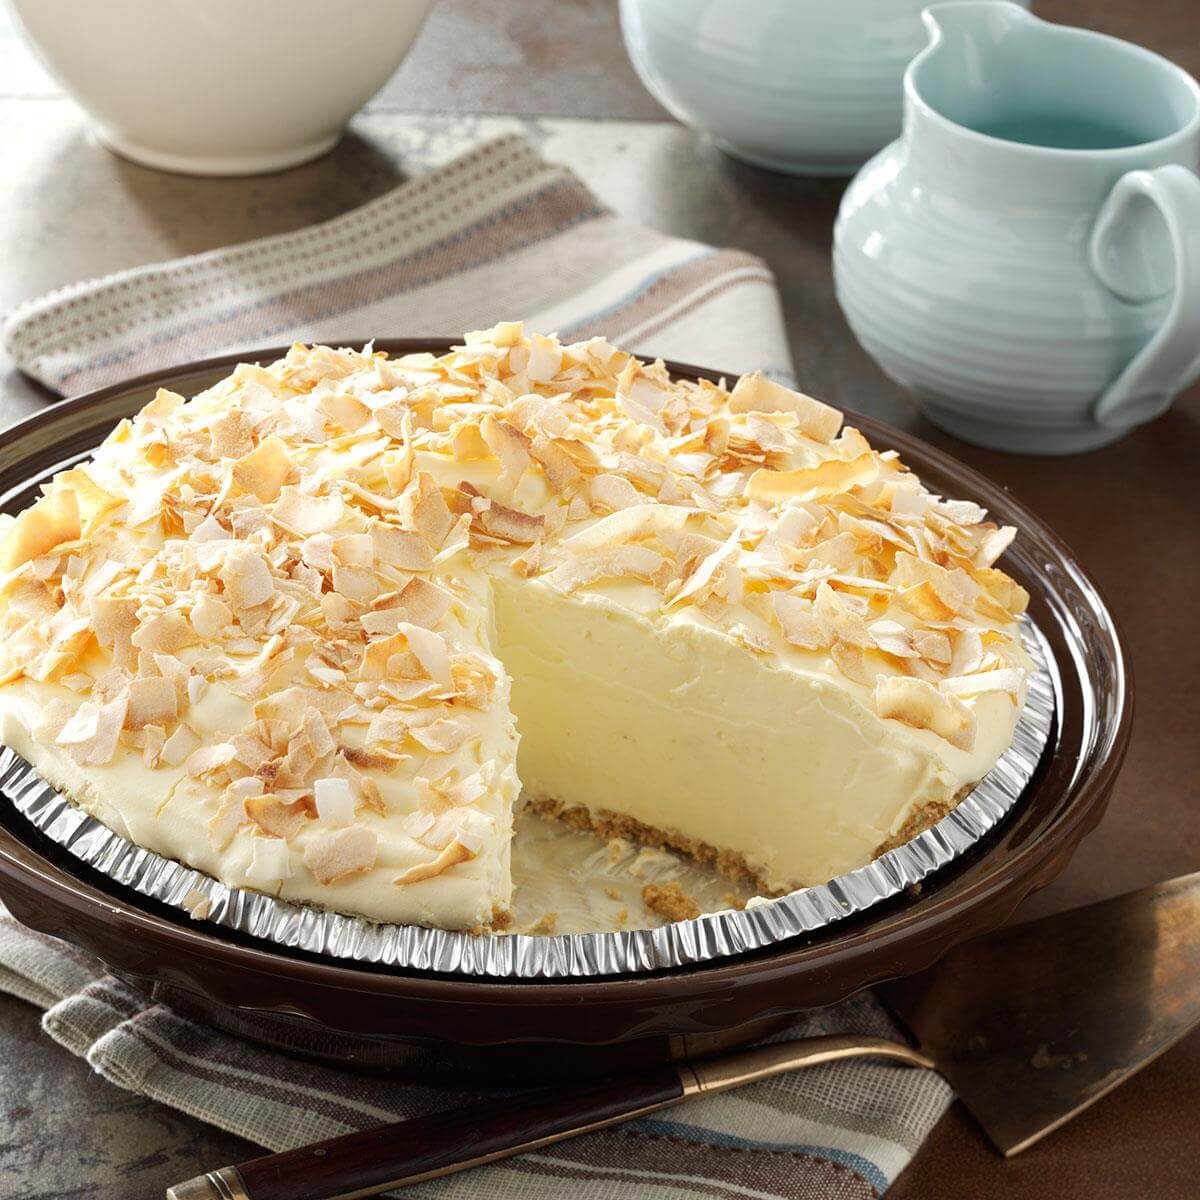 Top 15 Most Popular Taste Of Home Desserts Easy Recipes To Make At Home